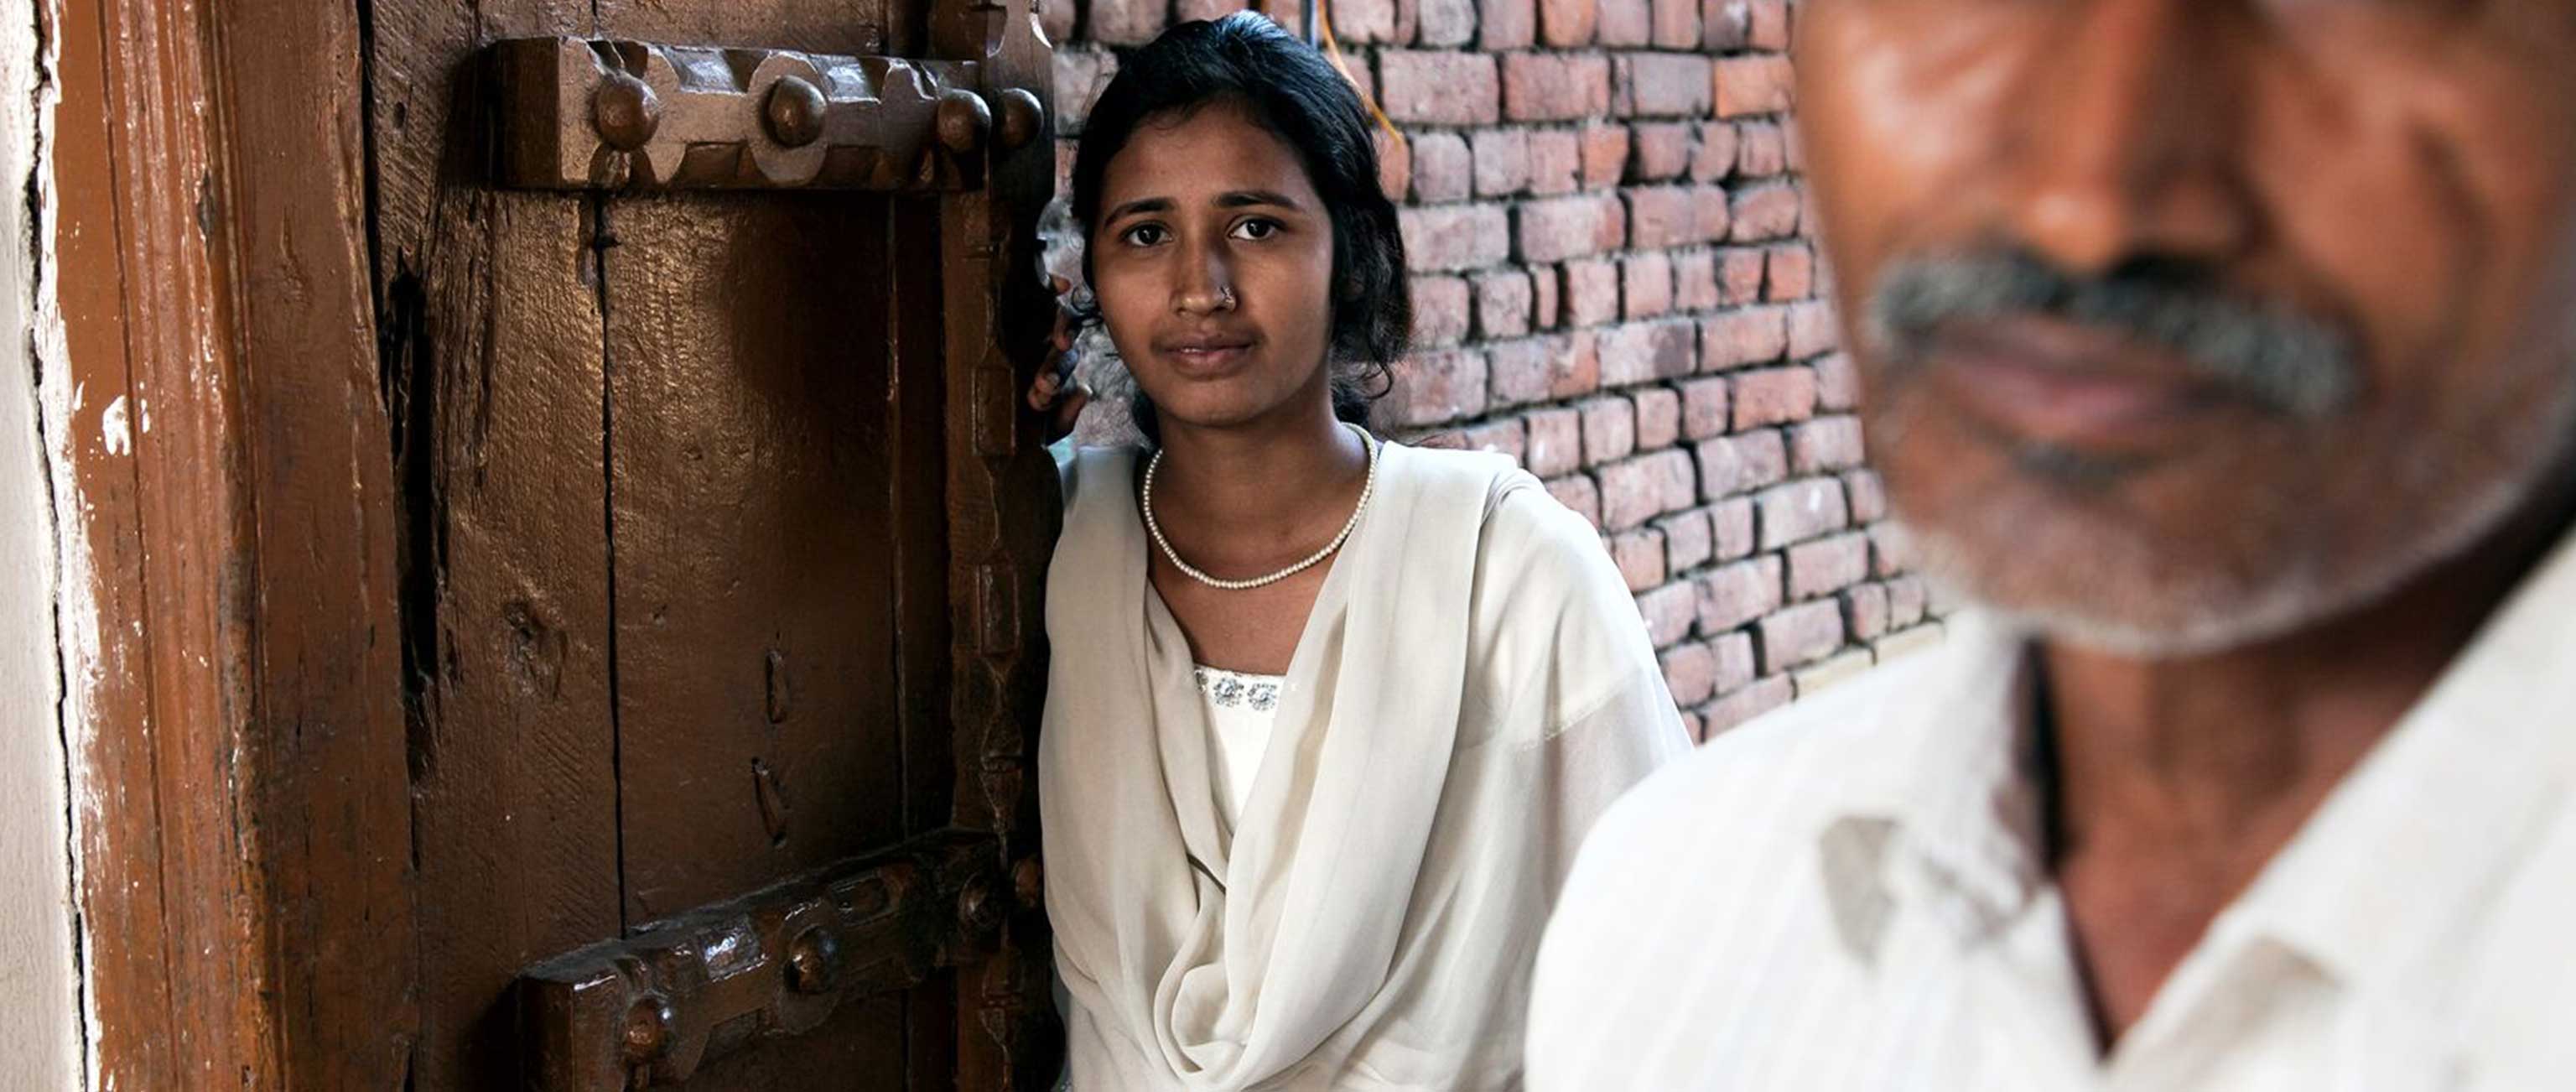 The Far-Reaching Economic Impacts of Child Marriage